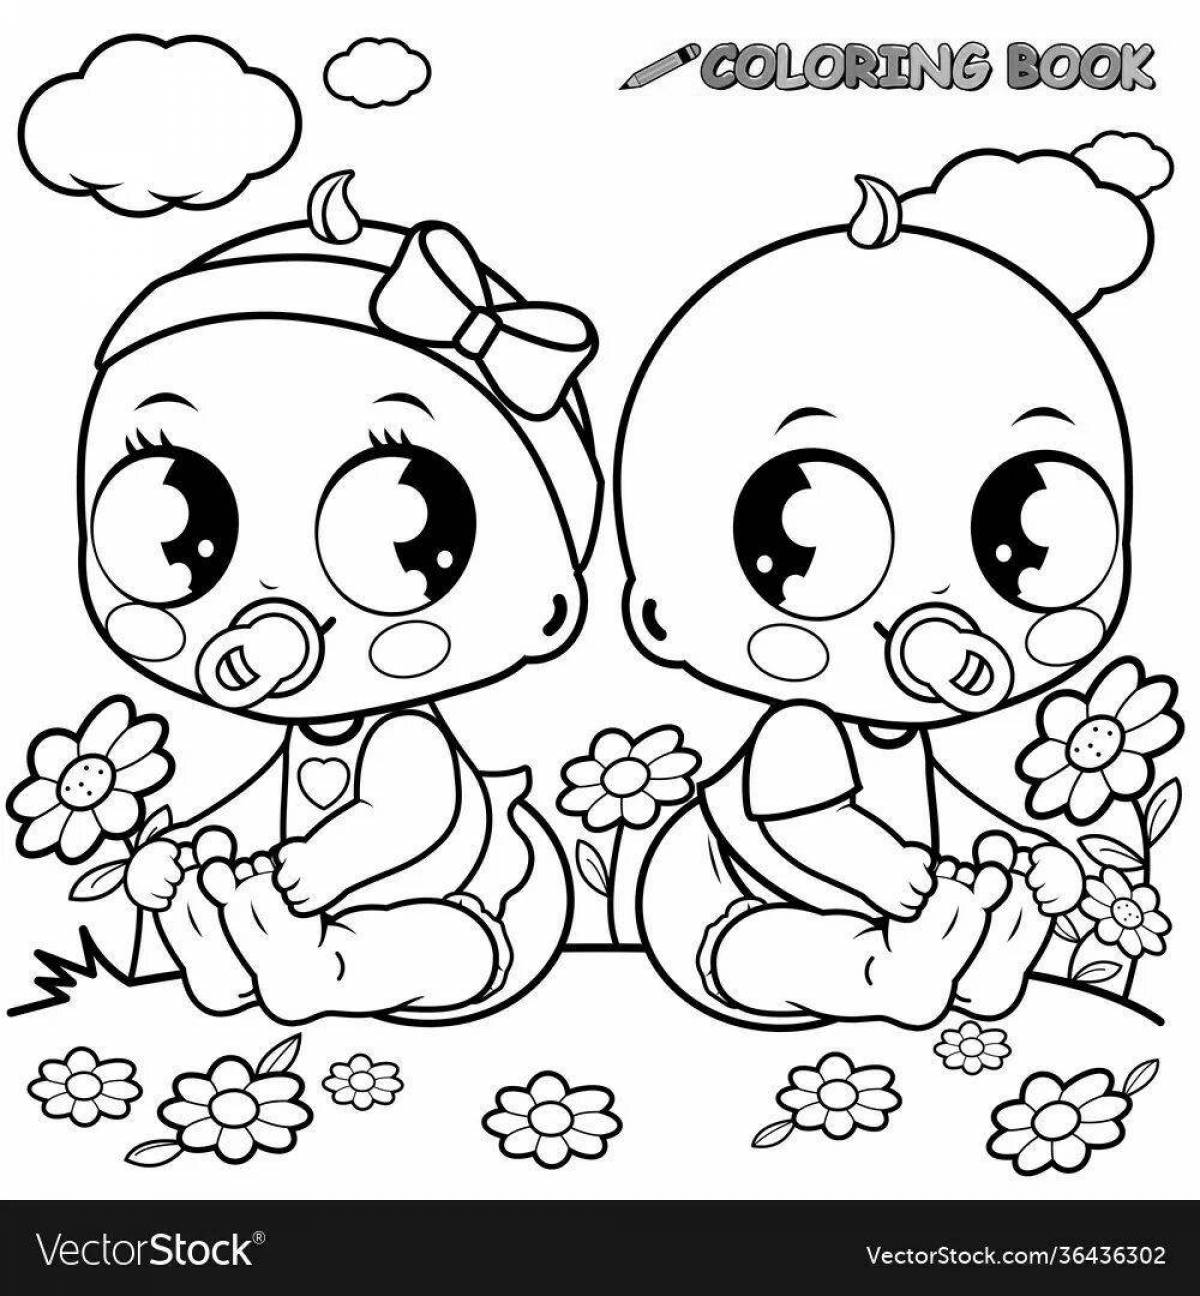 Coloring page wonderful baby bus